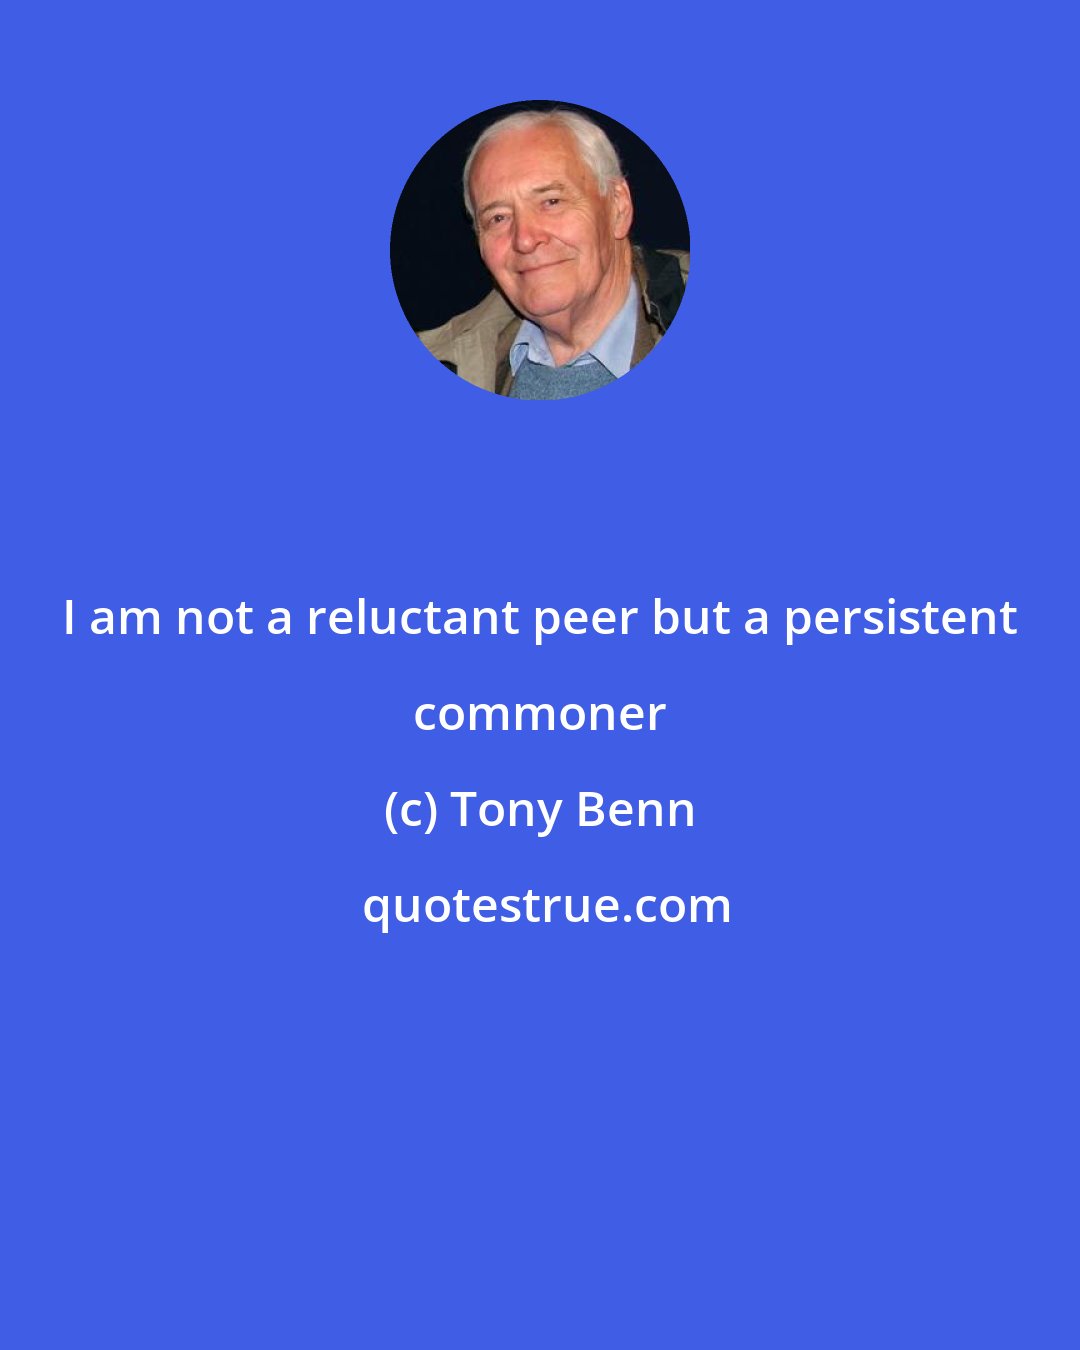 Tony Benn: I am not a reluctant peer but a persistent commoner